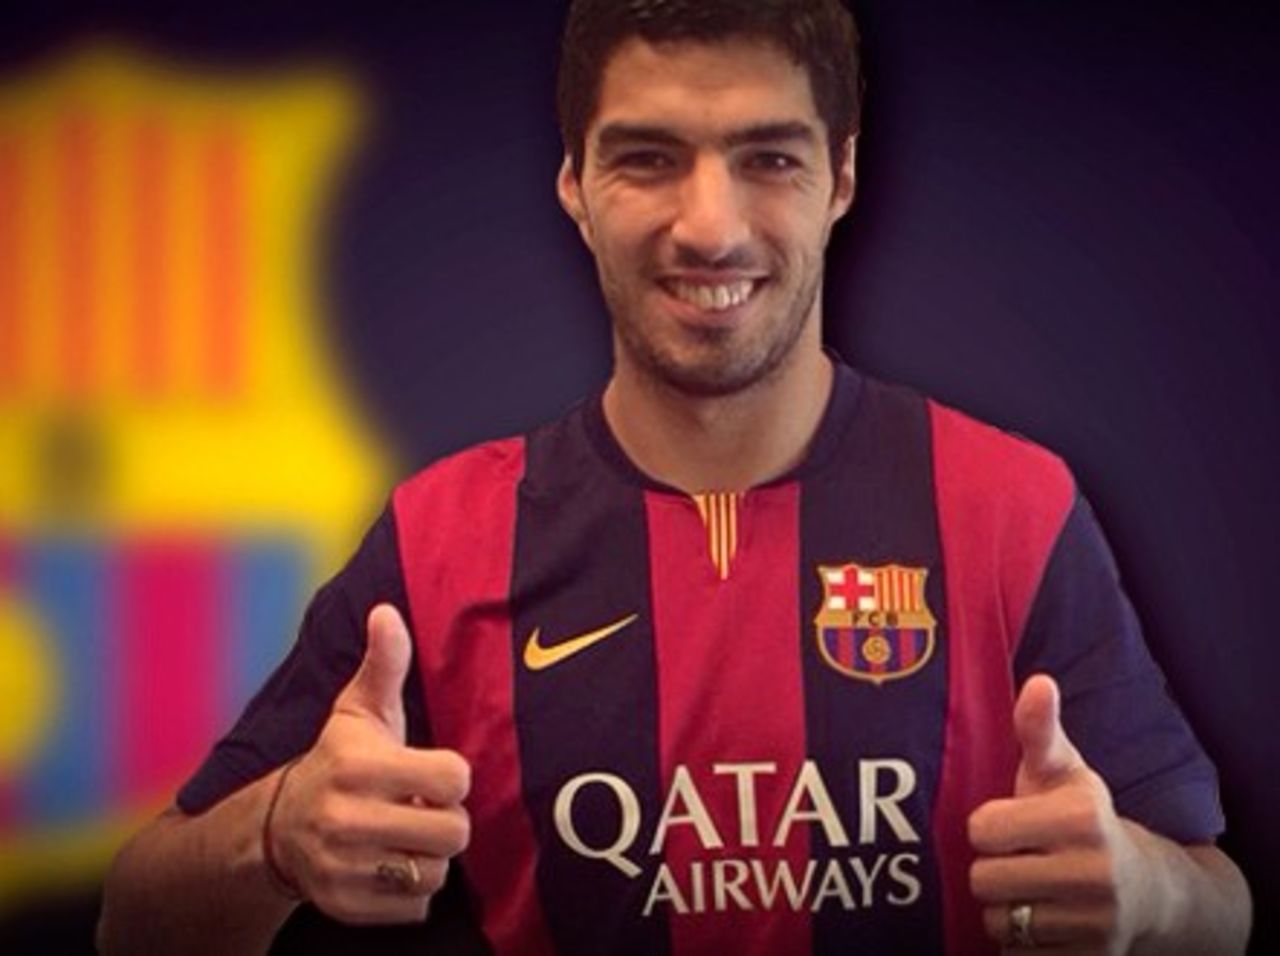 Barcelona released this image of Suarez on Friday.